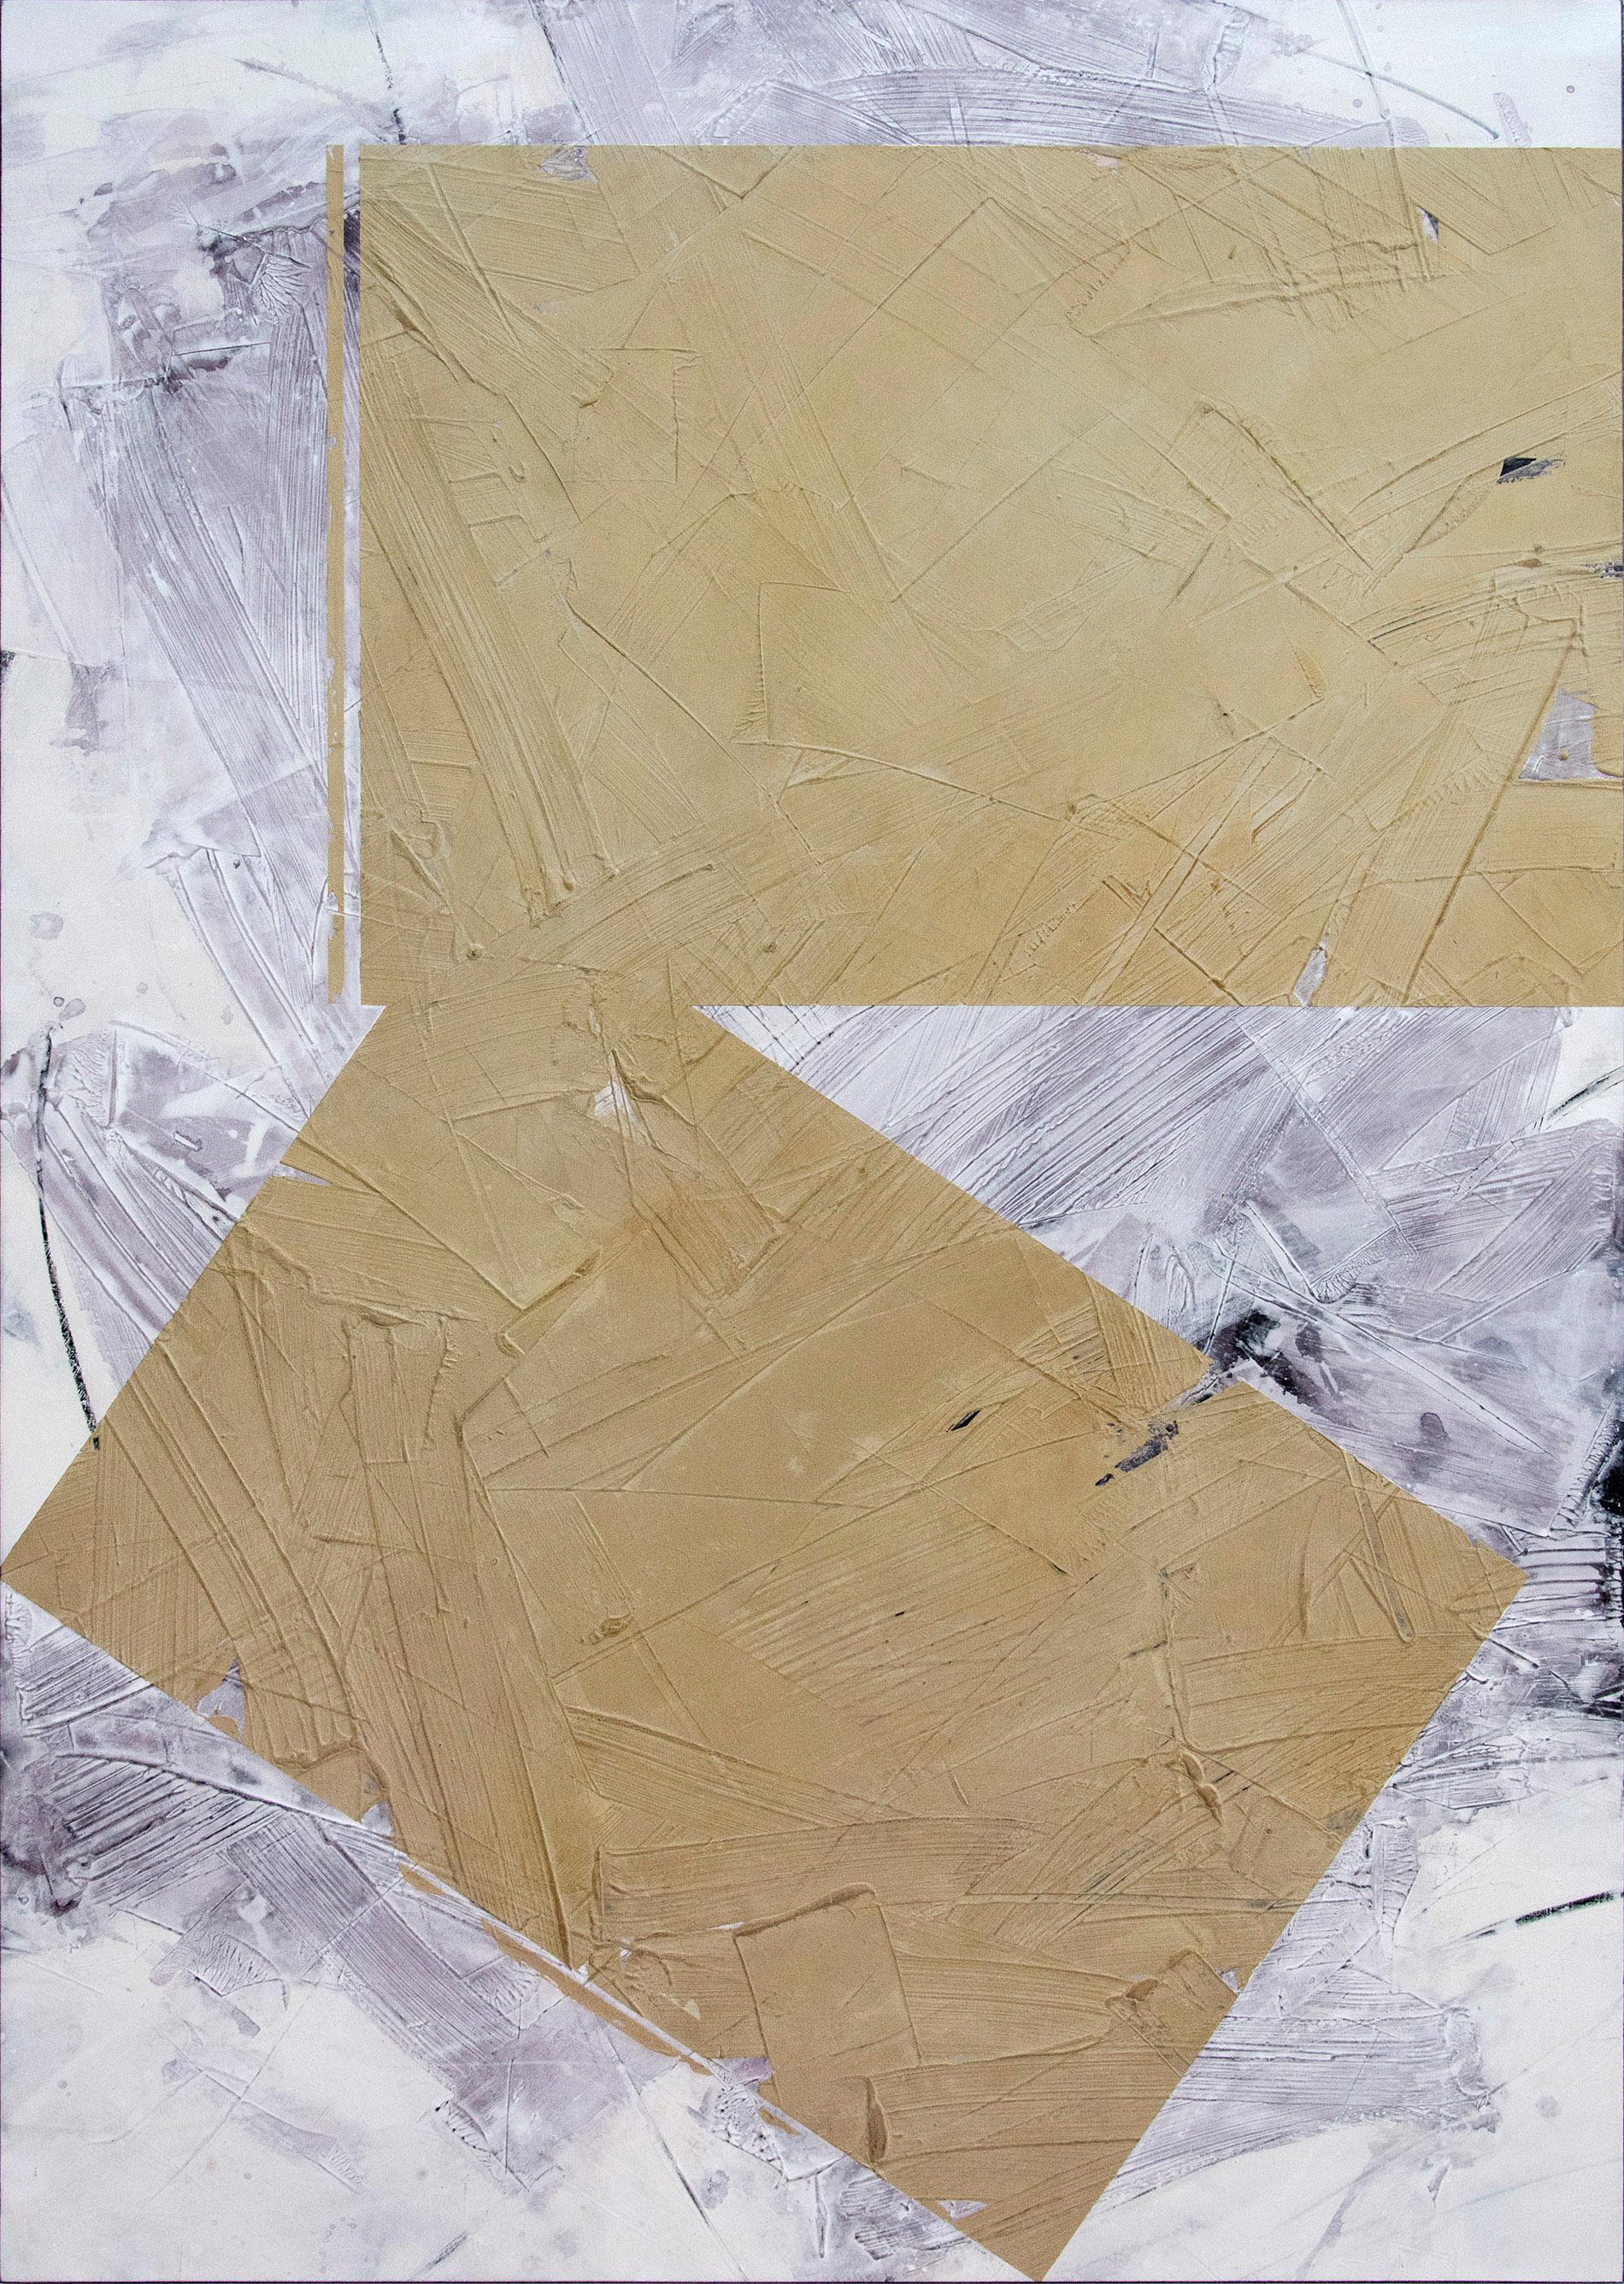 Equal Neutrals No 1 - soft, abstract shapes, marble dust, wax, acrylic on canvas - Painting by Ivo Stoyanov